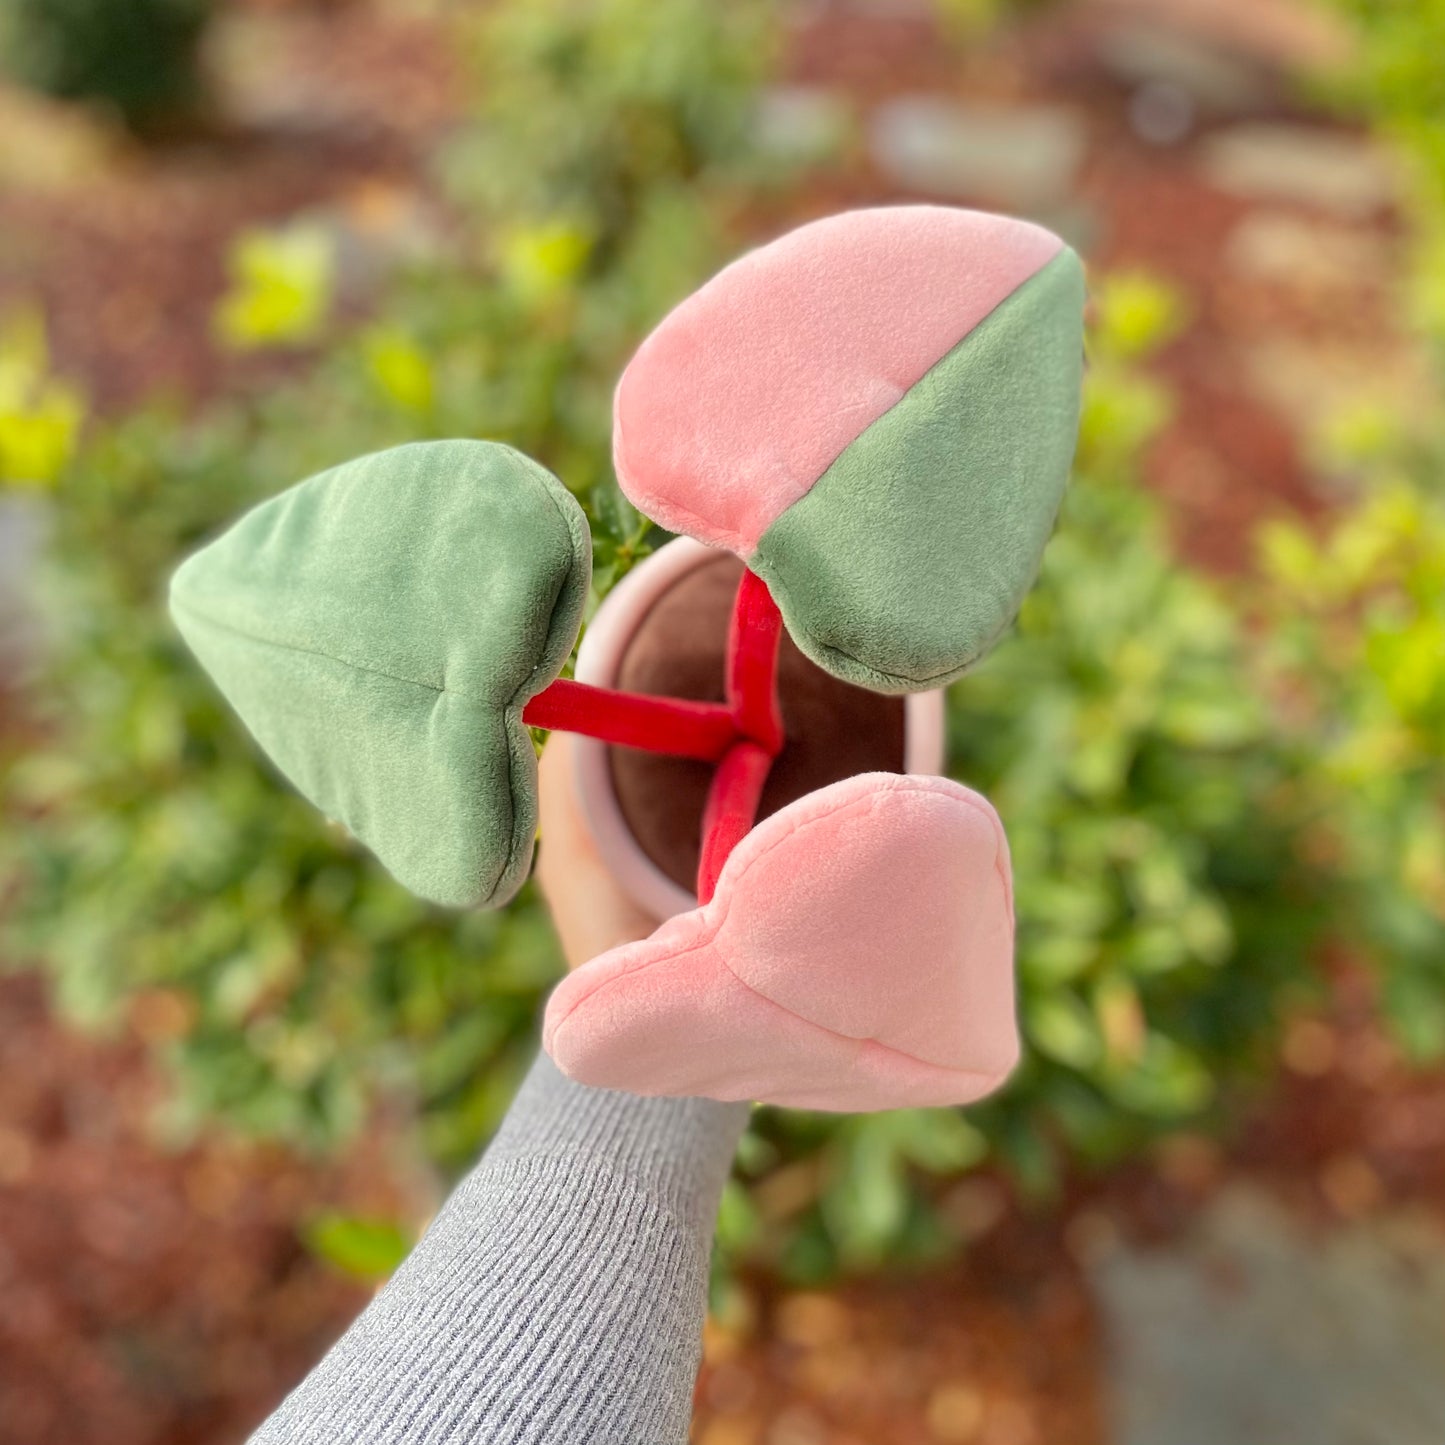 Top view of the plush toy of a potted plant with a pink pot, held by a woman's hand in front of a bush. The plant is a pink princess philodendron with three leaves. One leaf is green, another leaf is pink, and the third leaf has a split color pattern with the left side green and the right side pink. The dark red stems of the plant are visible.